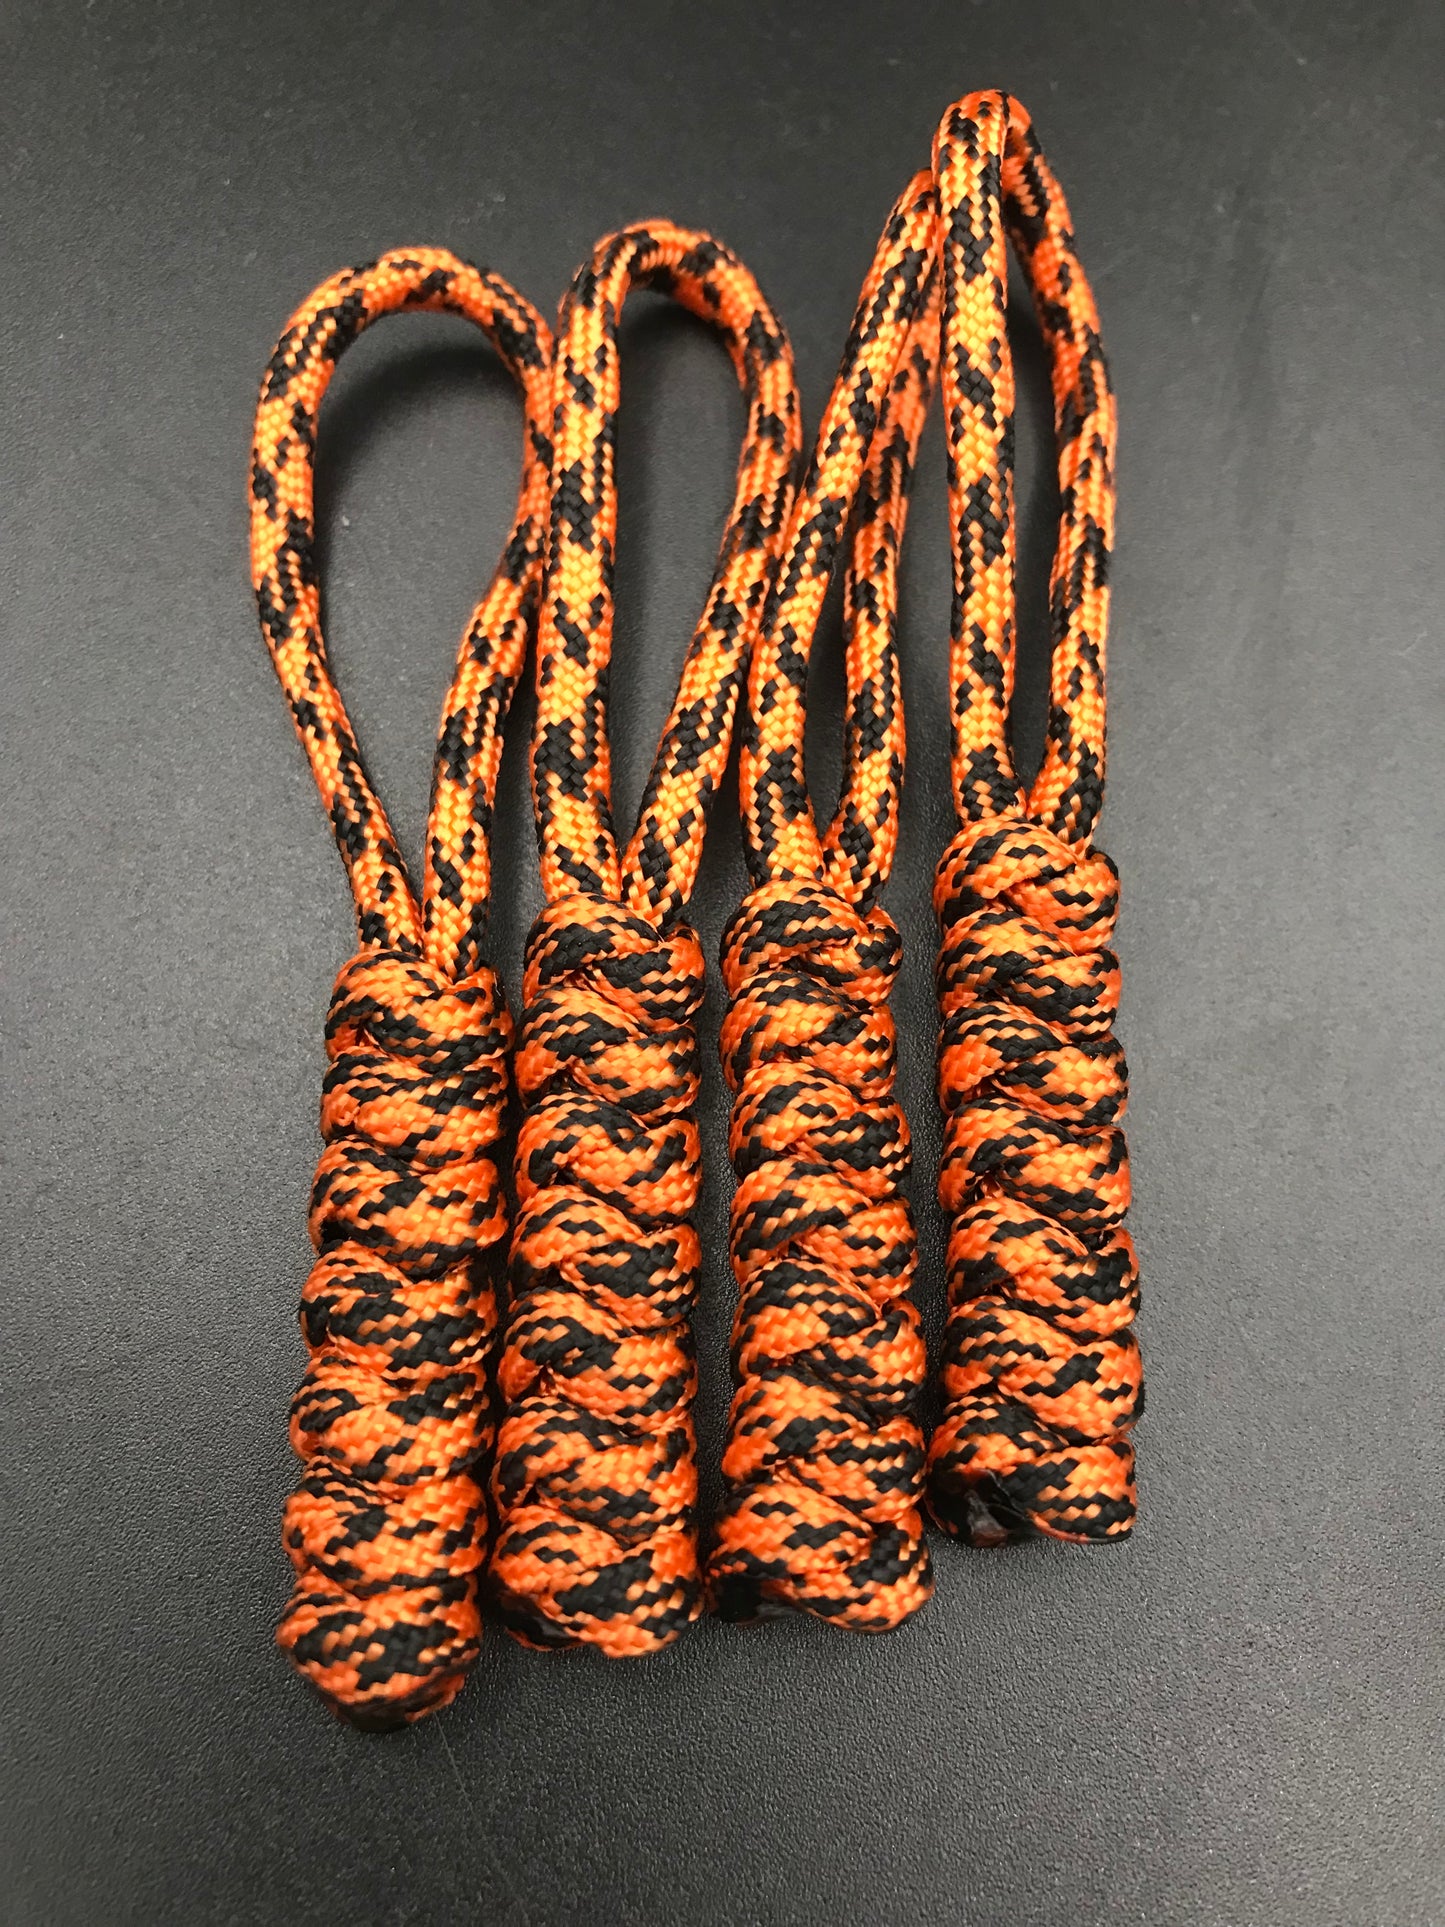 Paracord zip pulls in tiger orange (orange and black mix) (4 pack) light weight strong and hand crafted in U.K